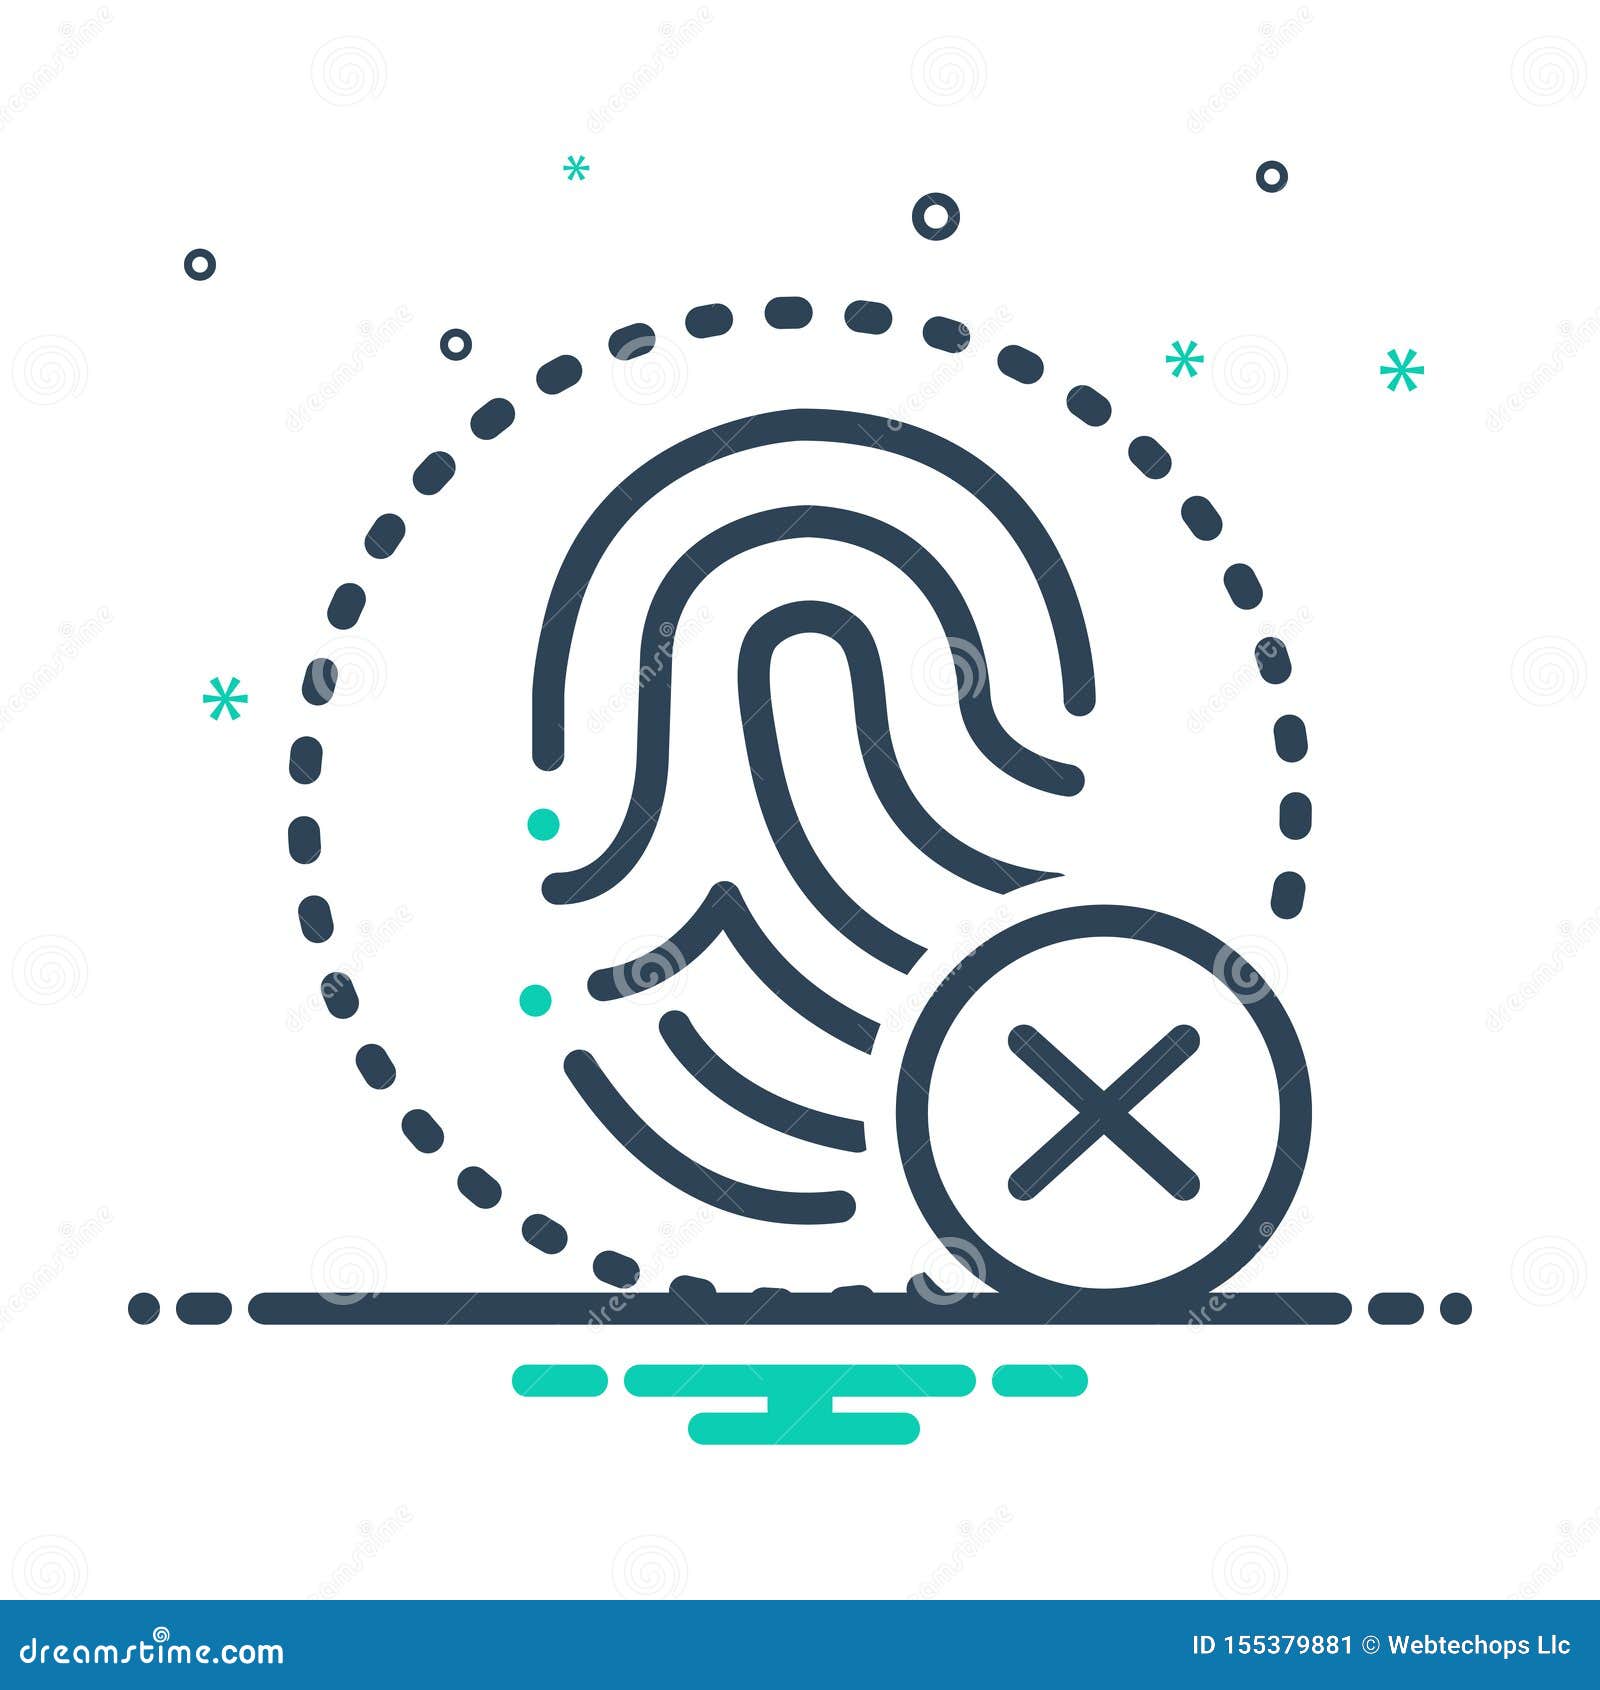 black mix icon for fingerprint, cancelation and biometry